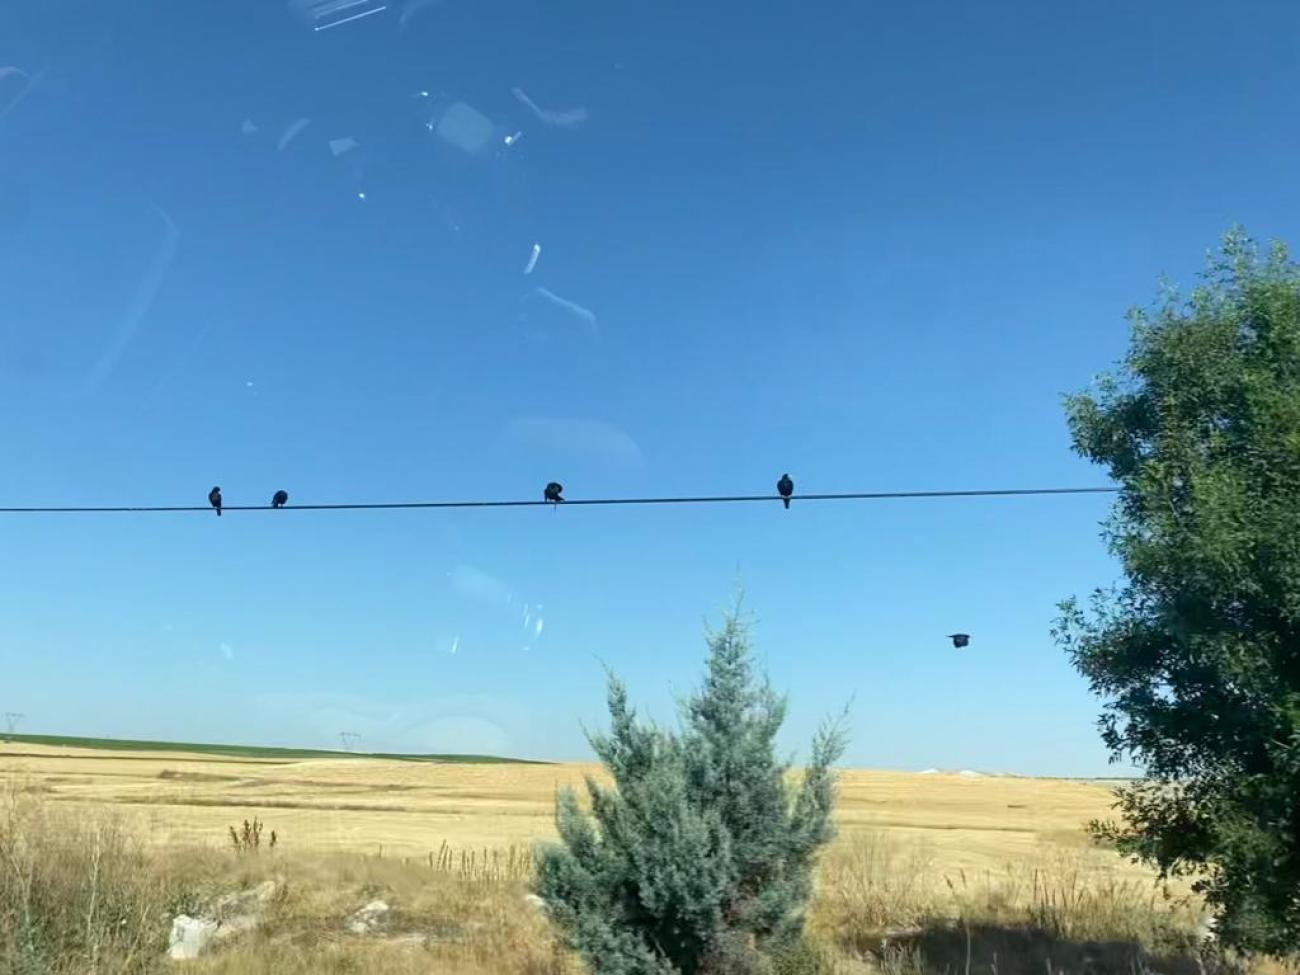 Birds on electric wires under blue skies